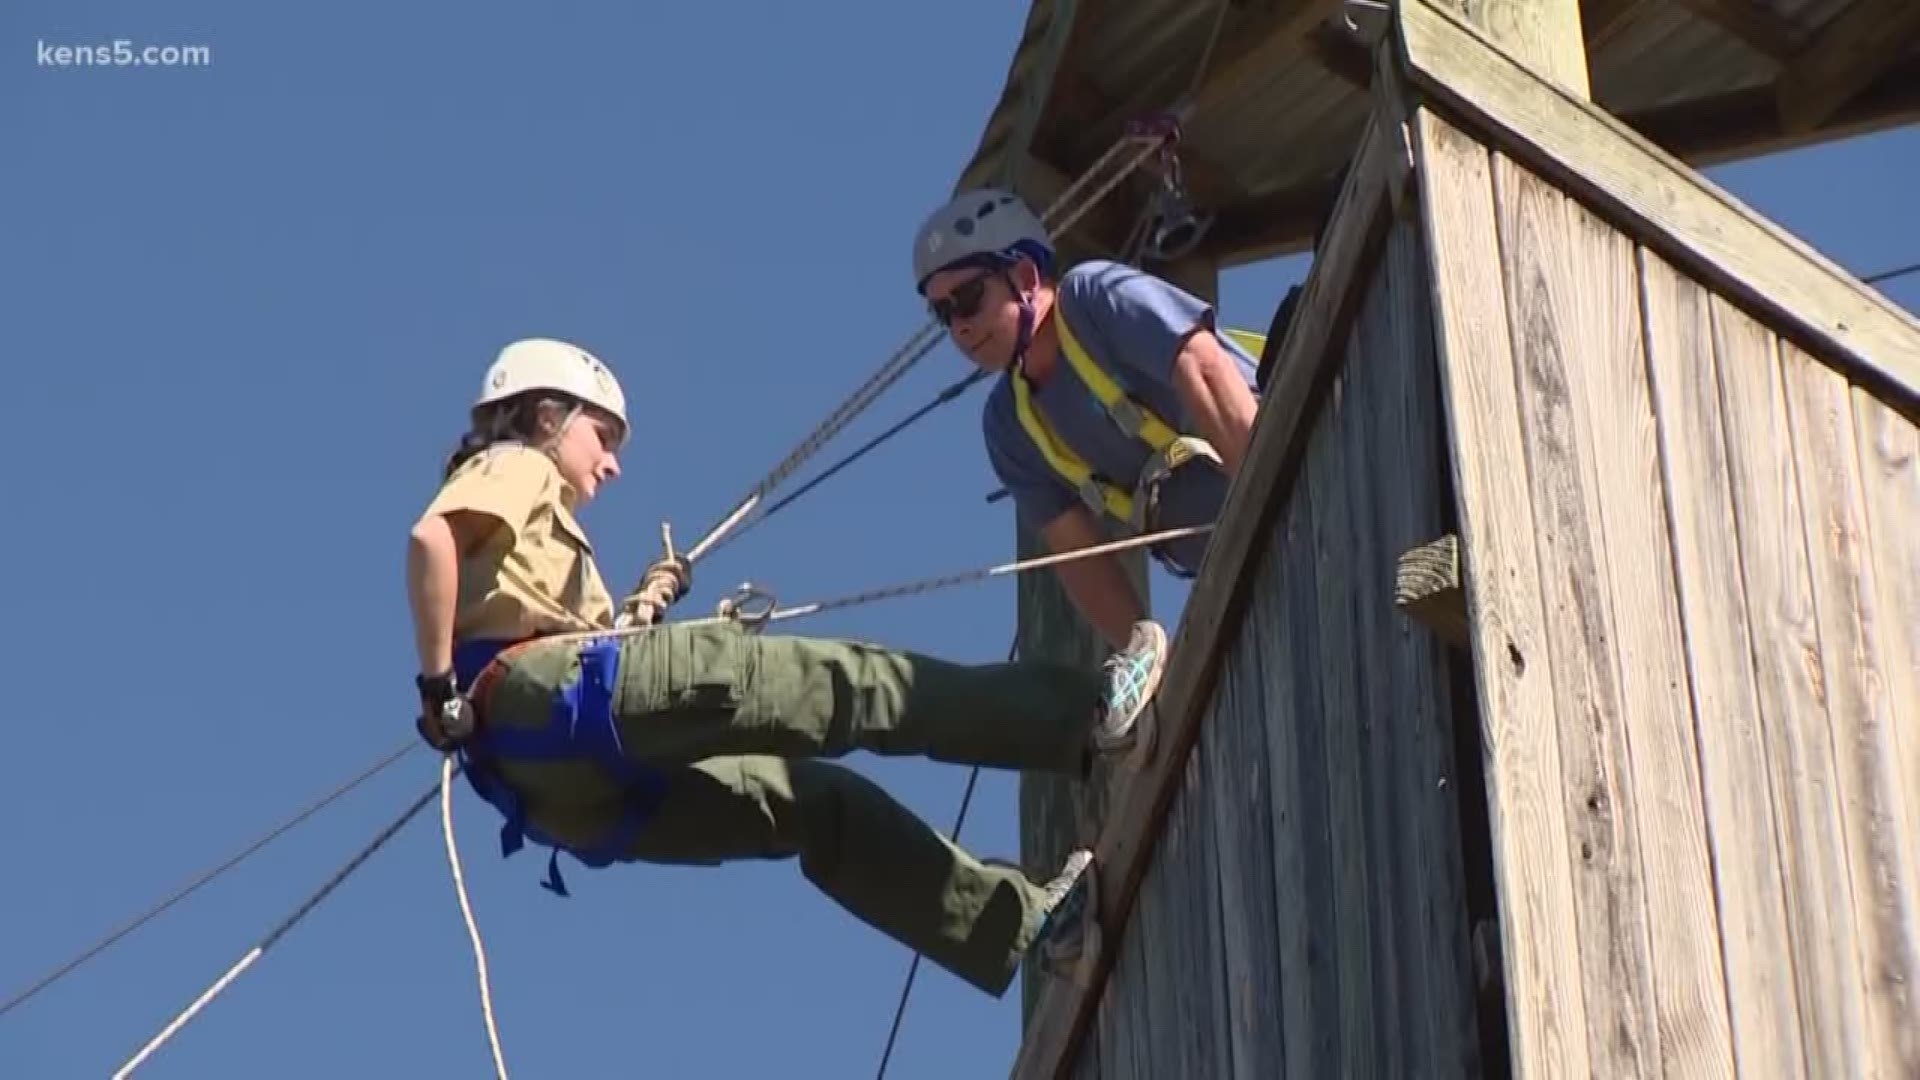 On February 1st, Boy Scouts of America will welcome troops of girls into their ranks. They held a girls fun day at McGimsey Scout Park to give families a glimpse at what scouting has to offer: everything from tying knots to climbing walls. But one girl ha